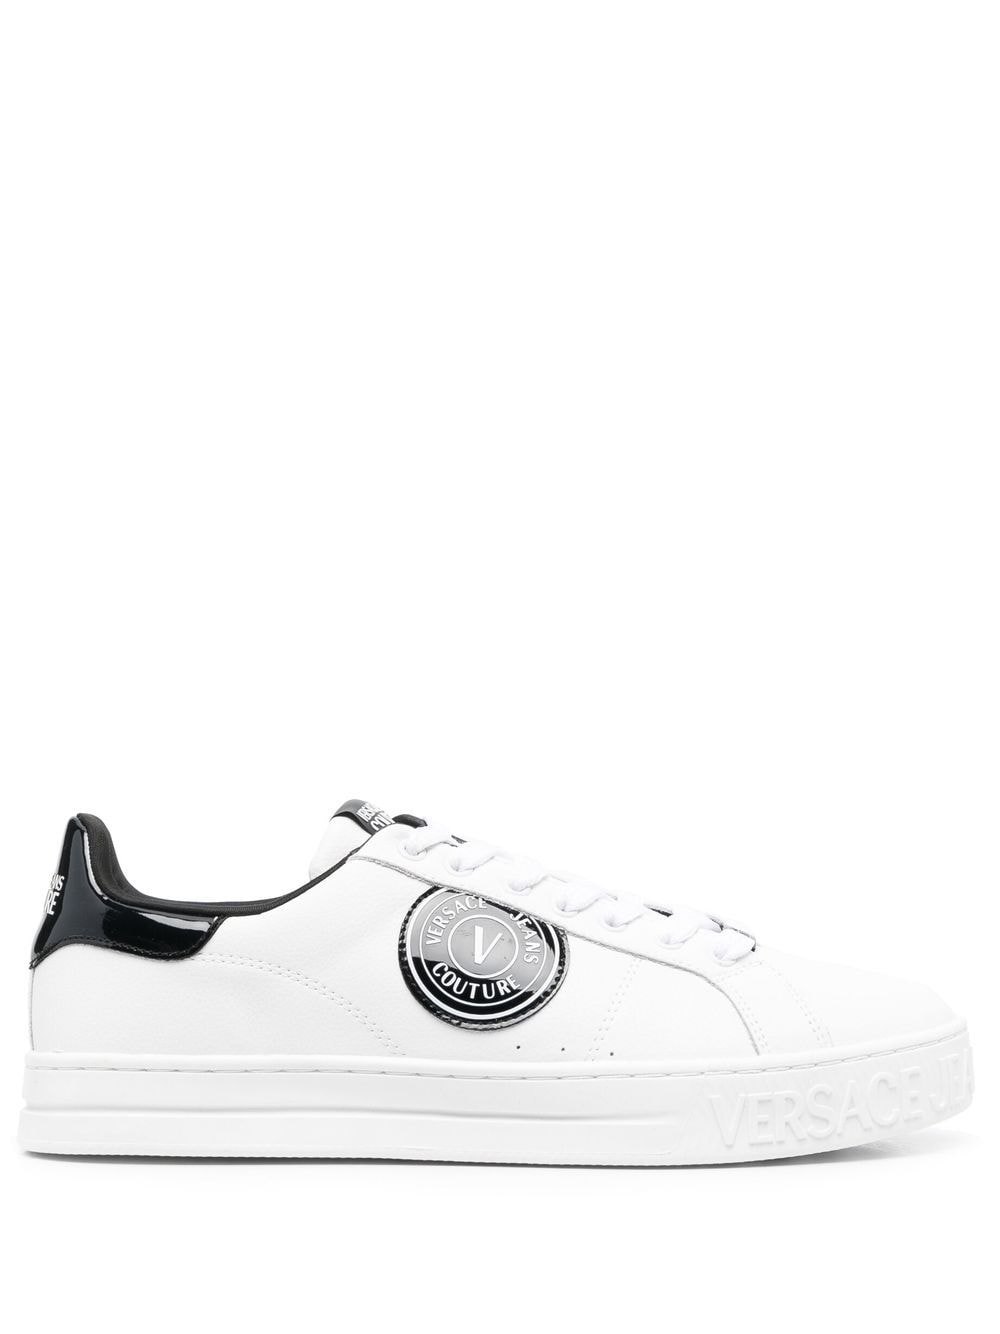 Versace Jeans Couture logo-patch low-top sneakers - White